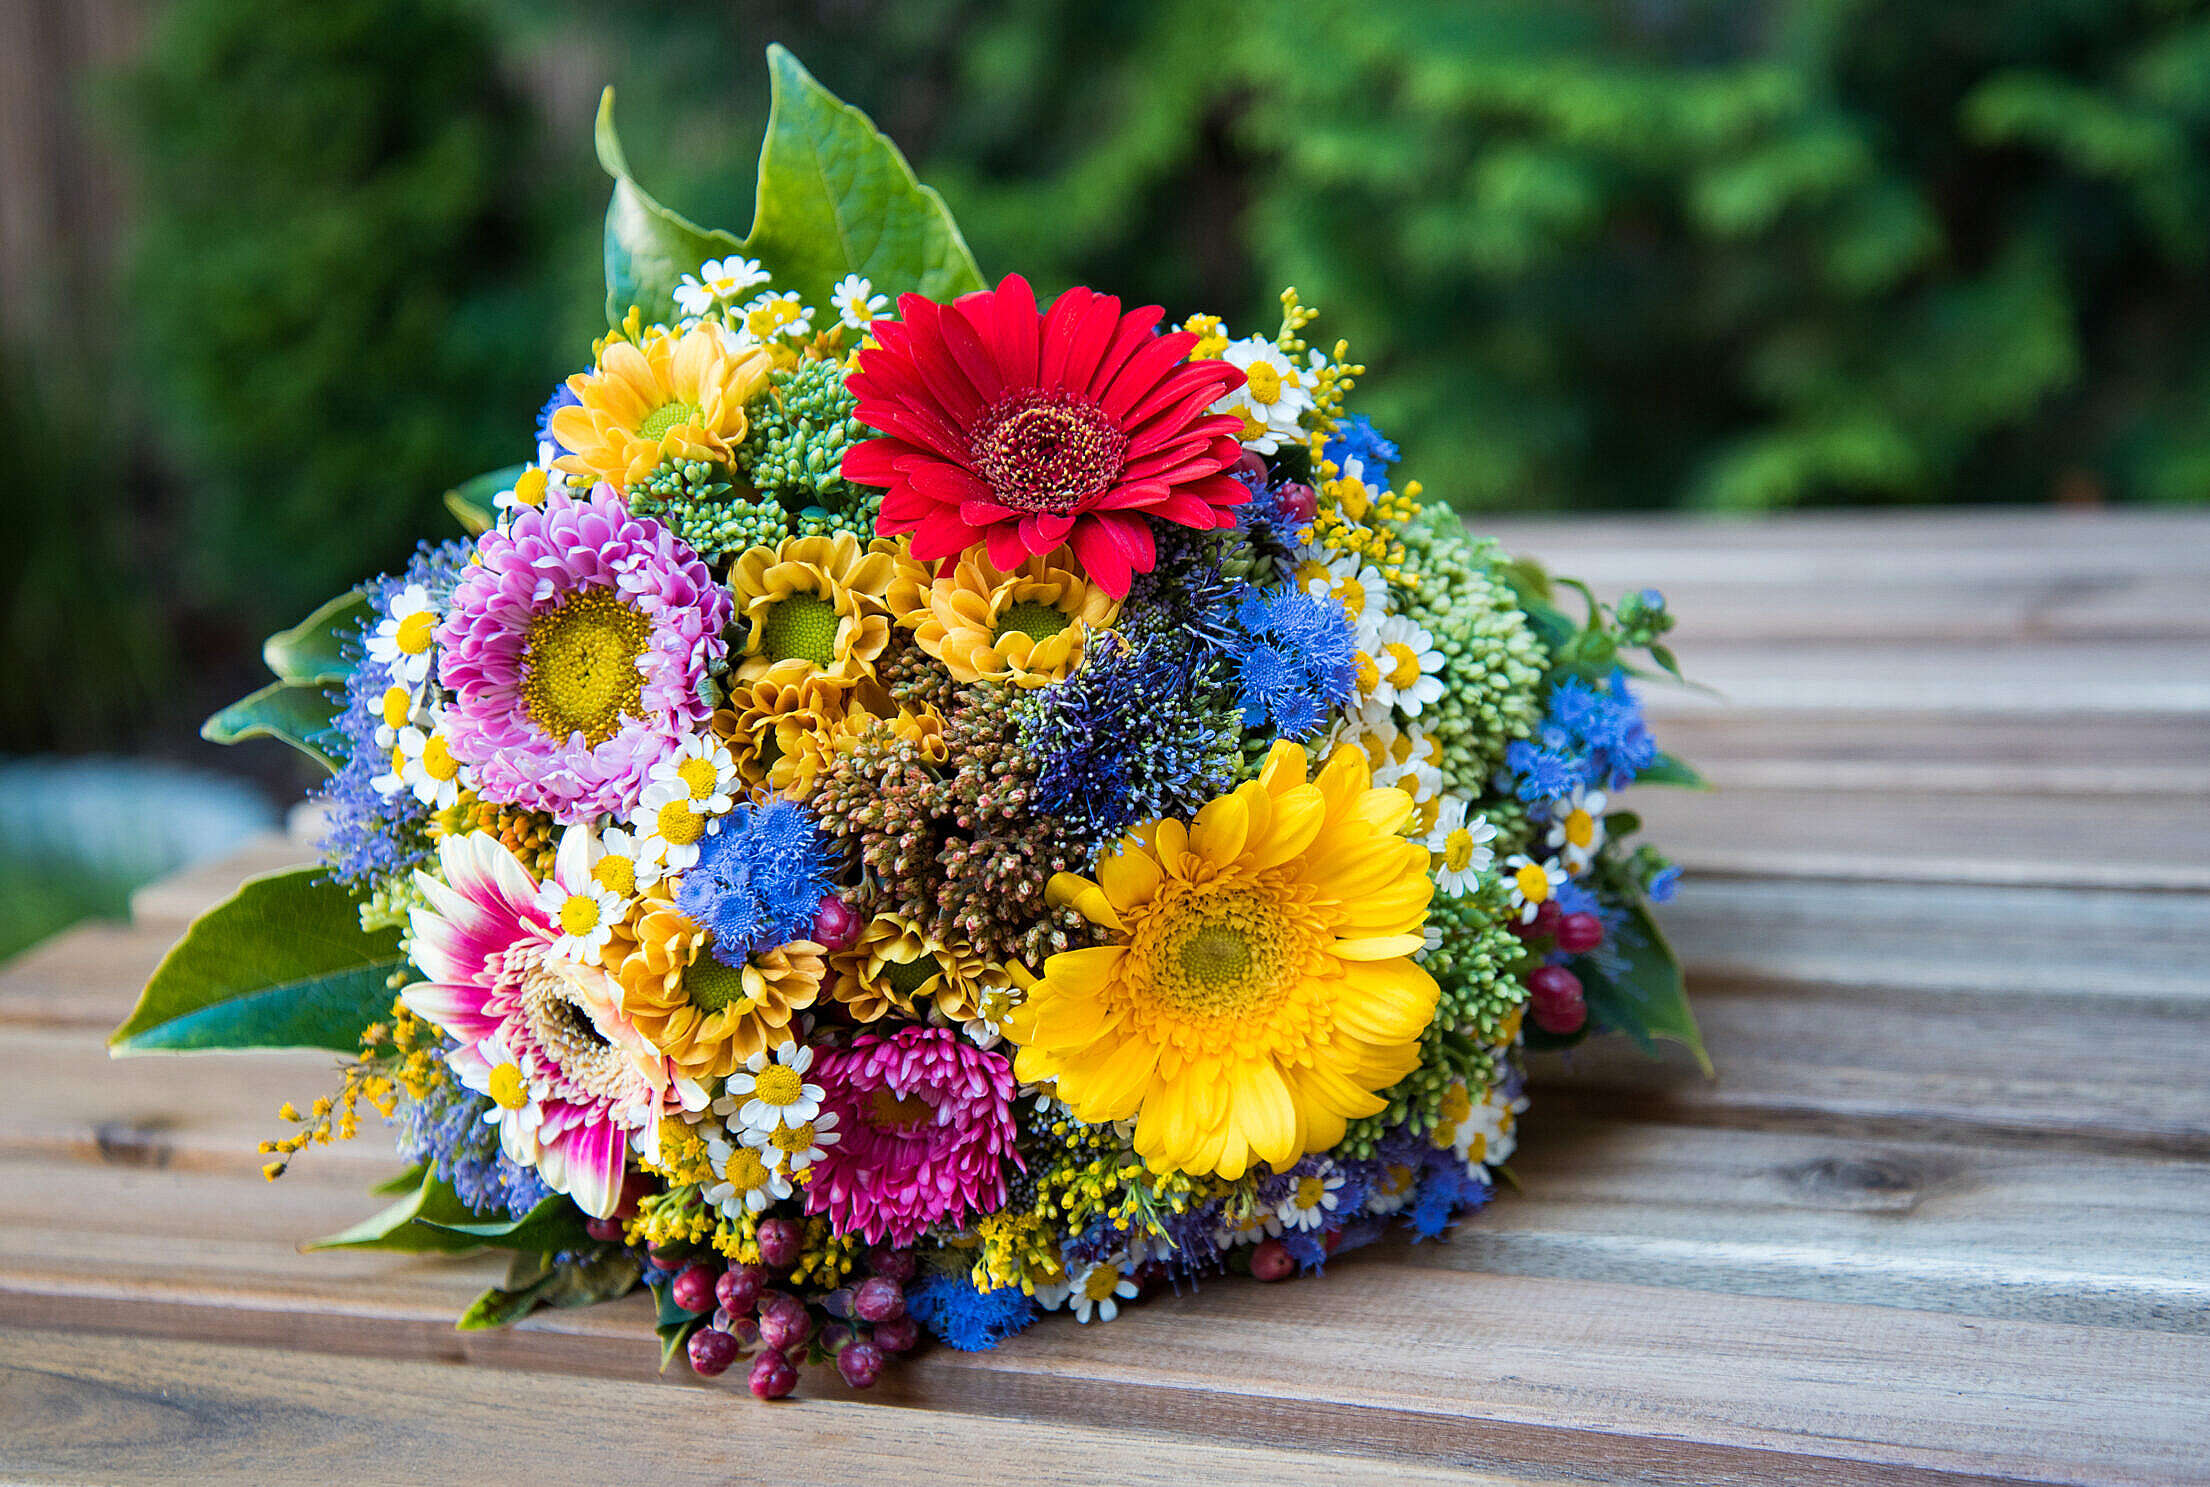 Hand-Tied Bouquet of Beautiful Colorful Flowers Free Stock Photo